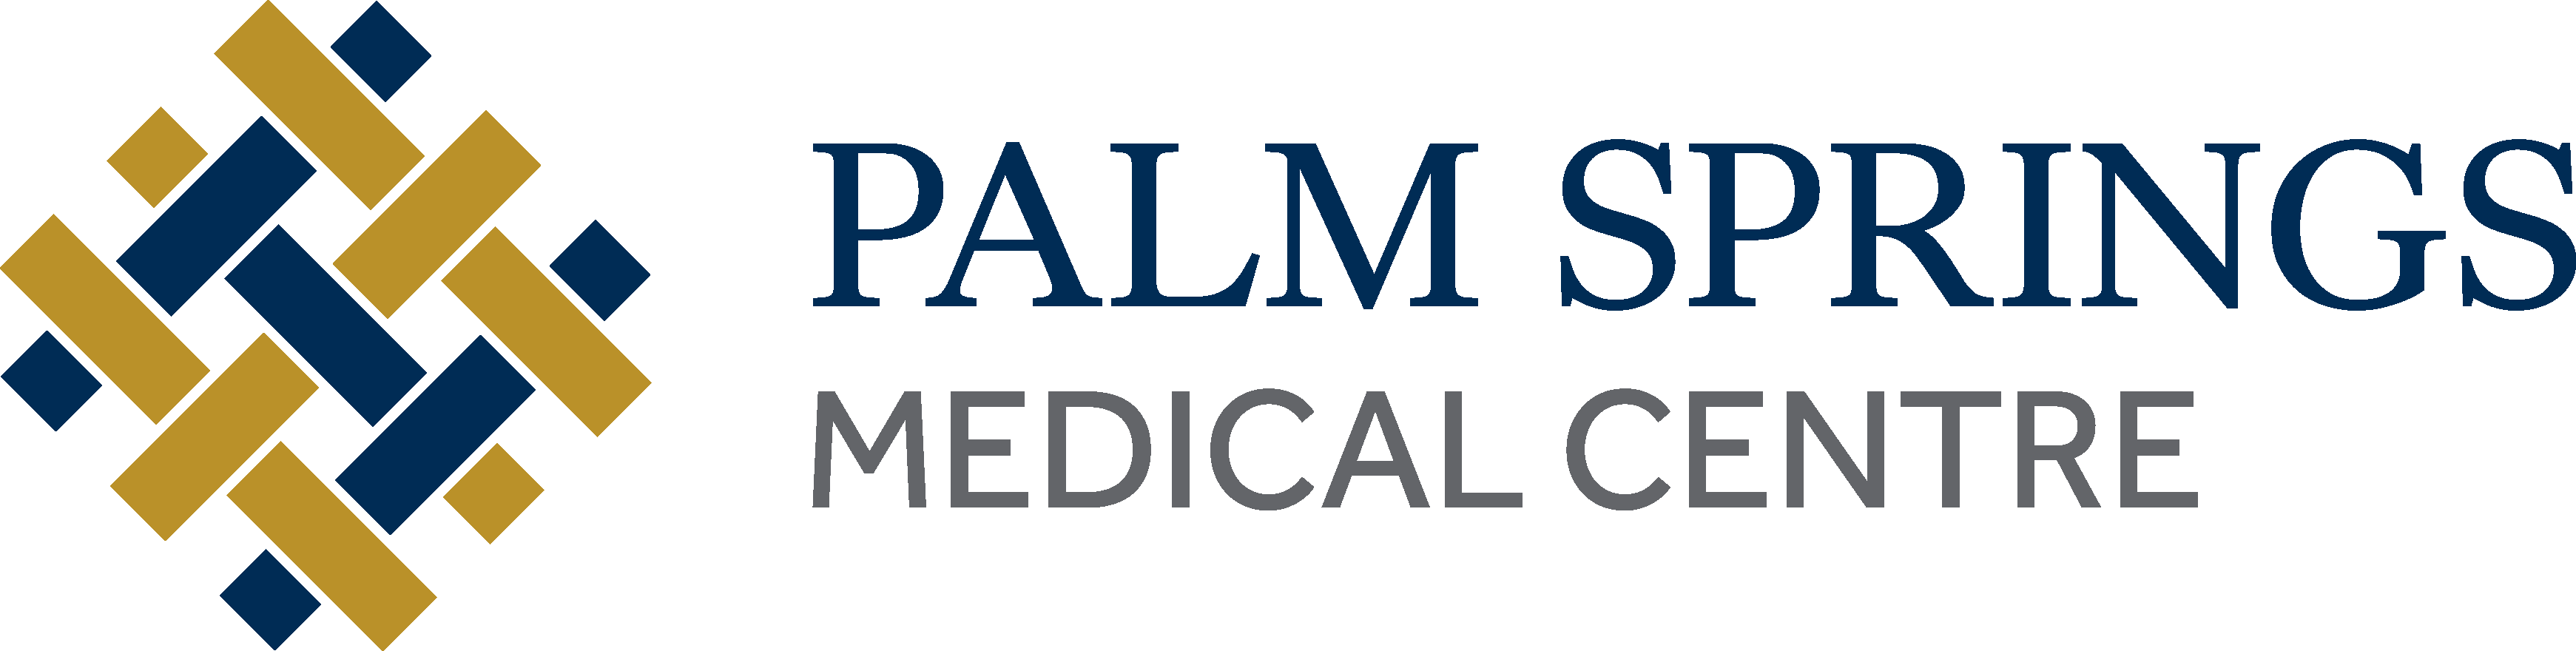 Healthcare Assessments | Palm Springs Medical Centre